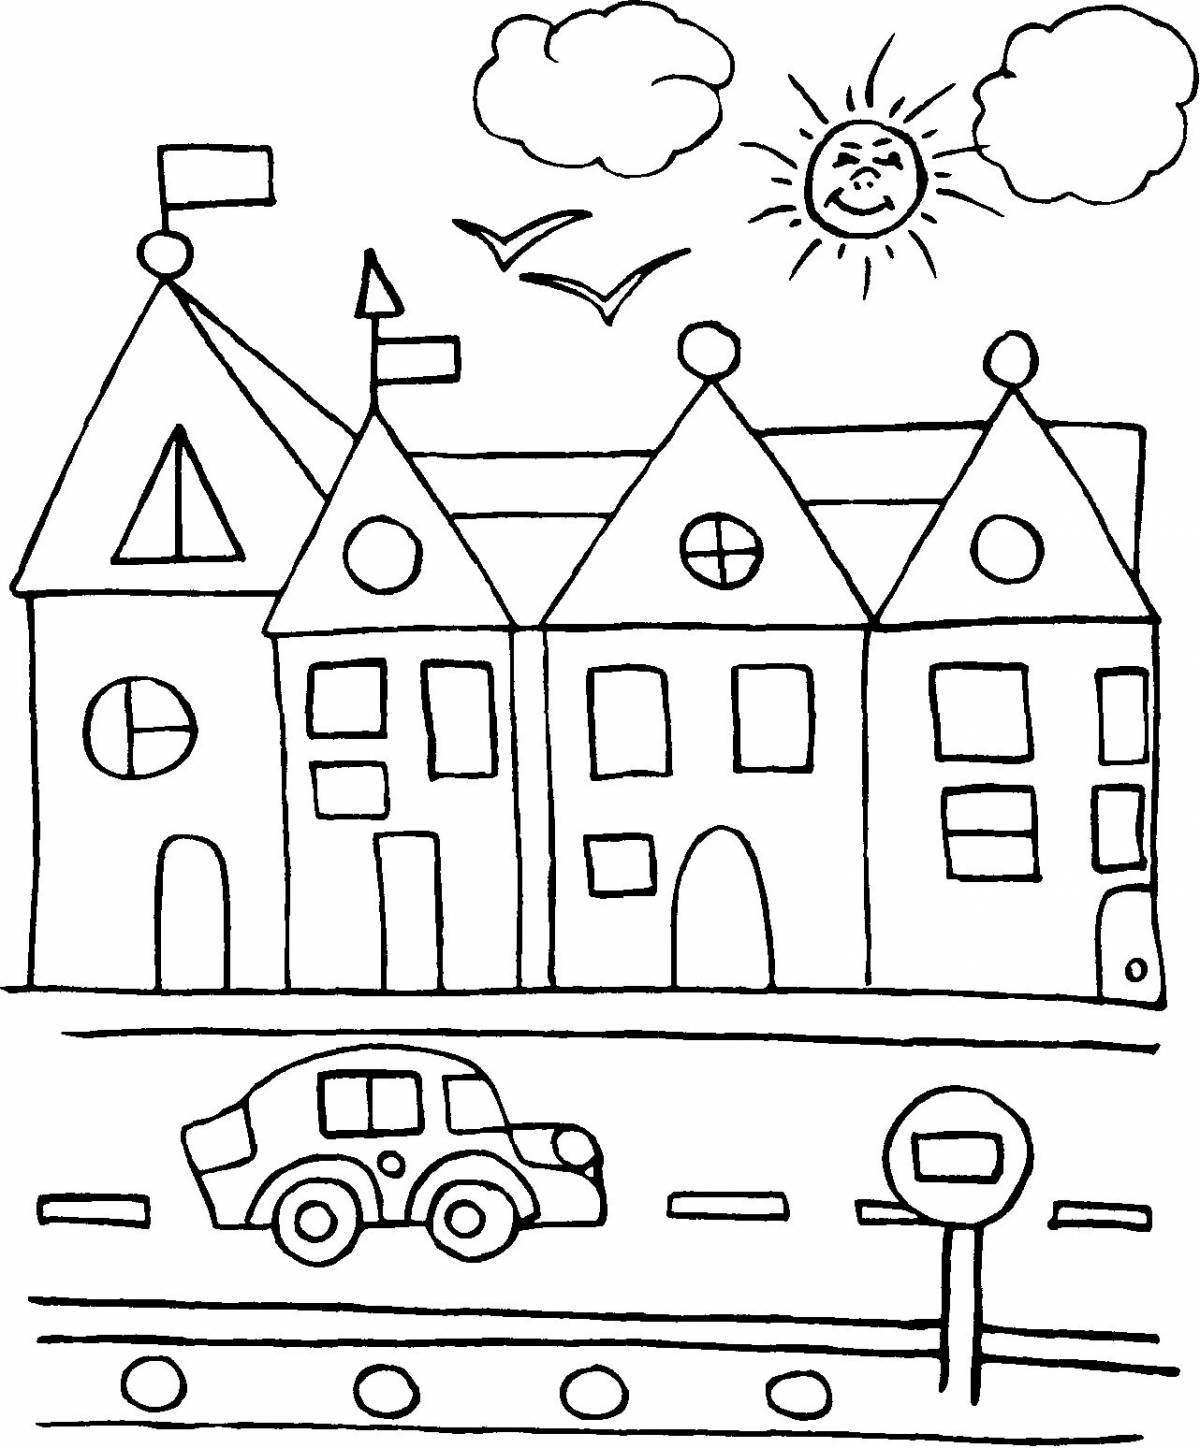 Charming city street coloring pages for kids